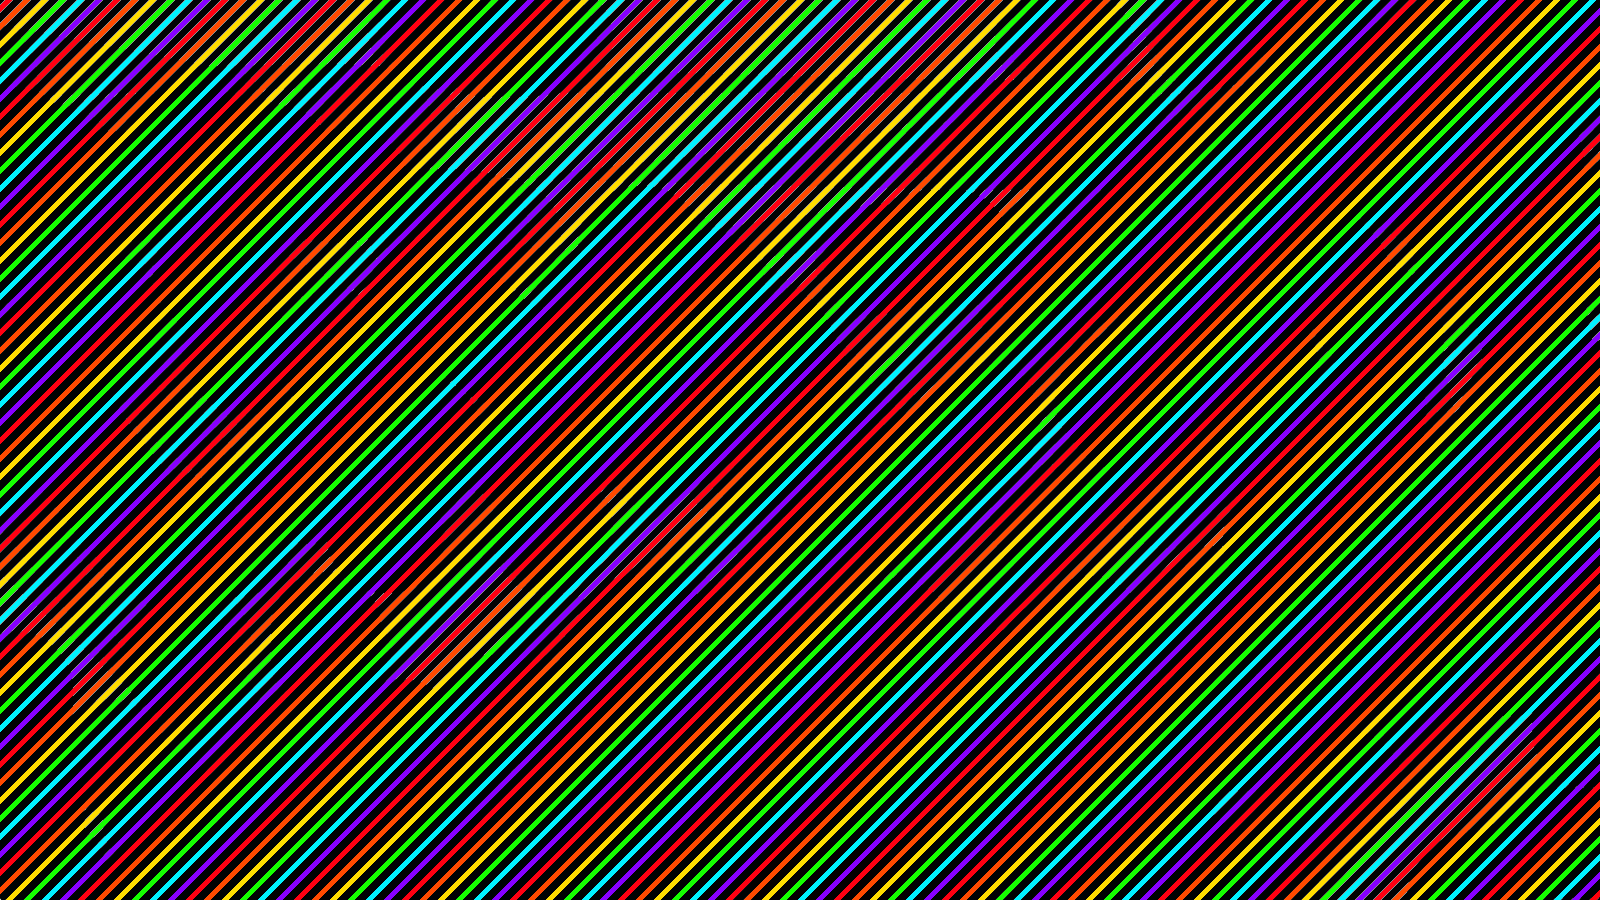 Trippy Rainbow Wallpapers